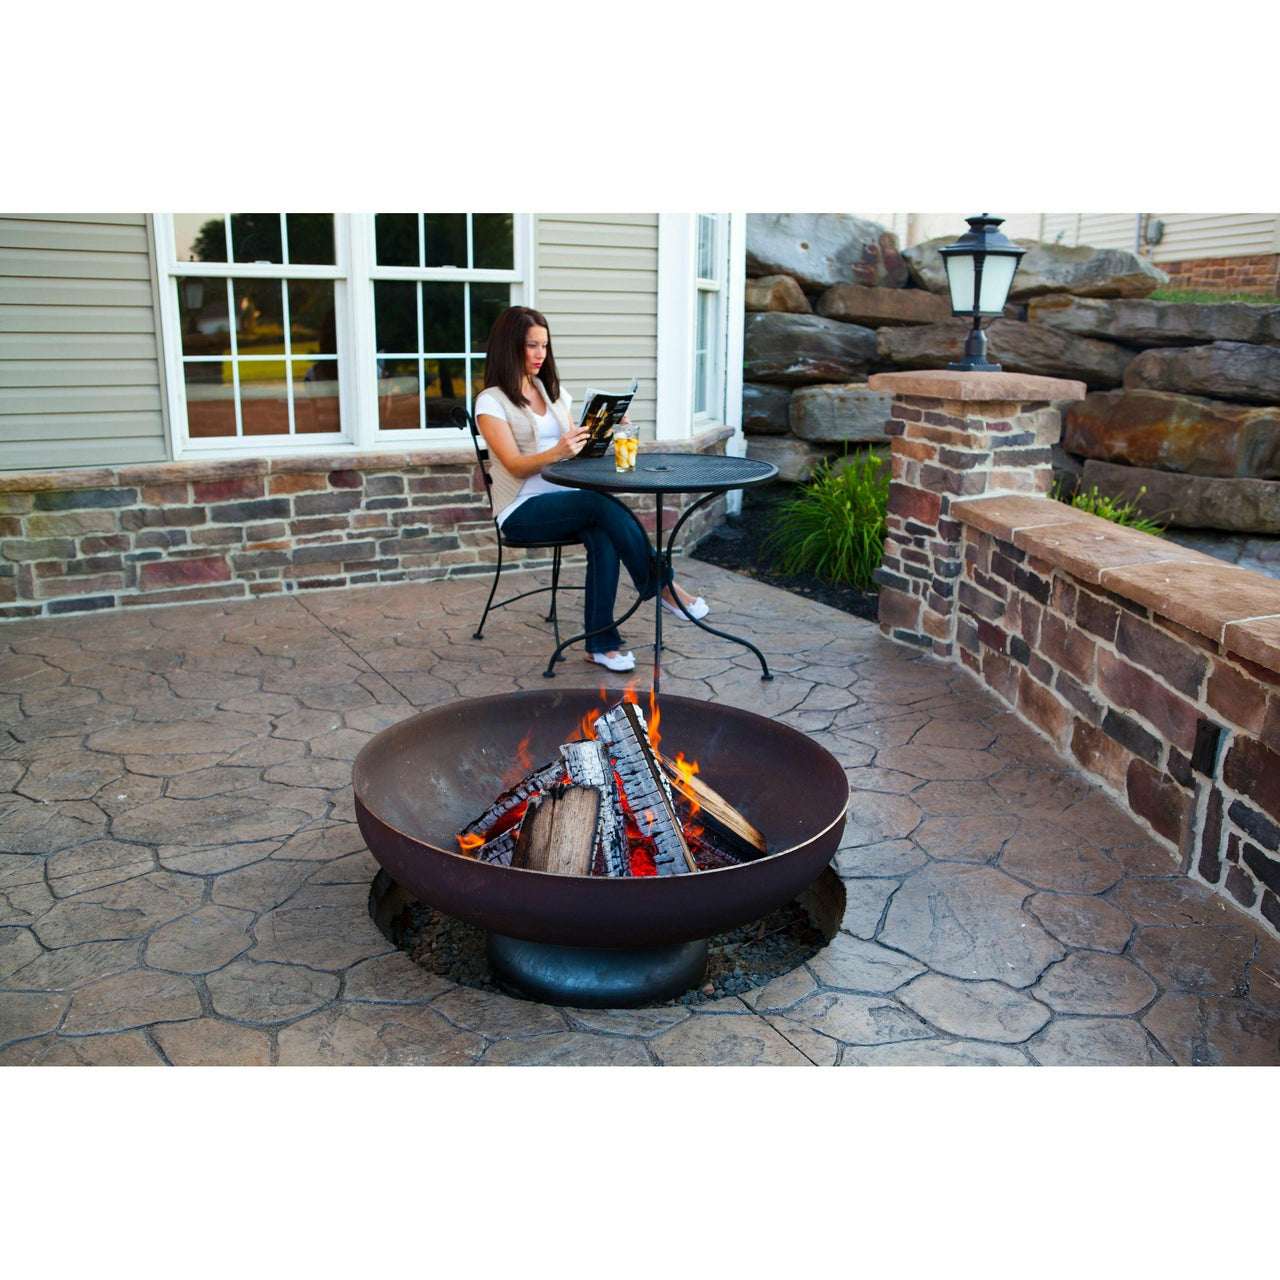 Ohio Flame Patriot Fire Pit - Fire Pit Stock